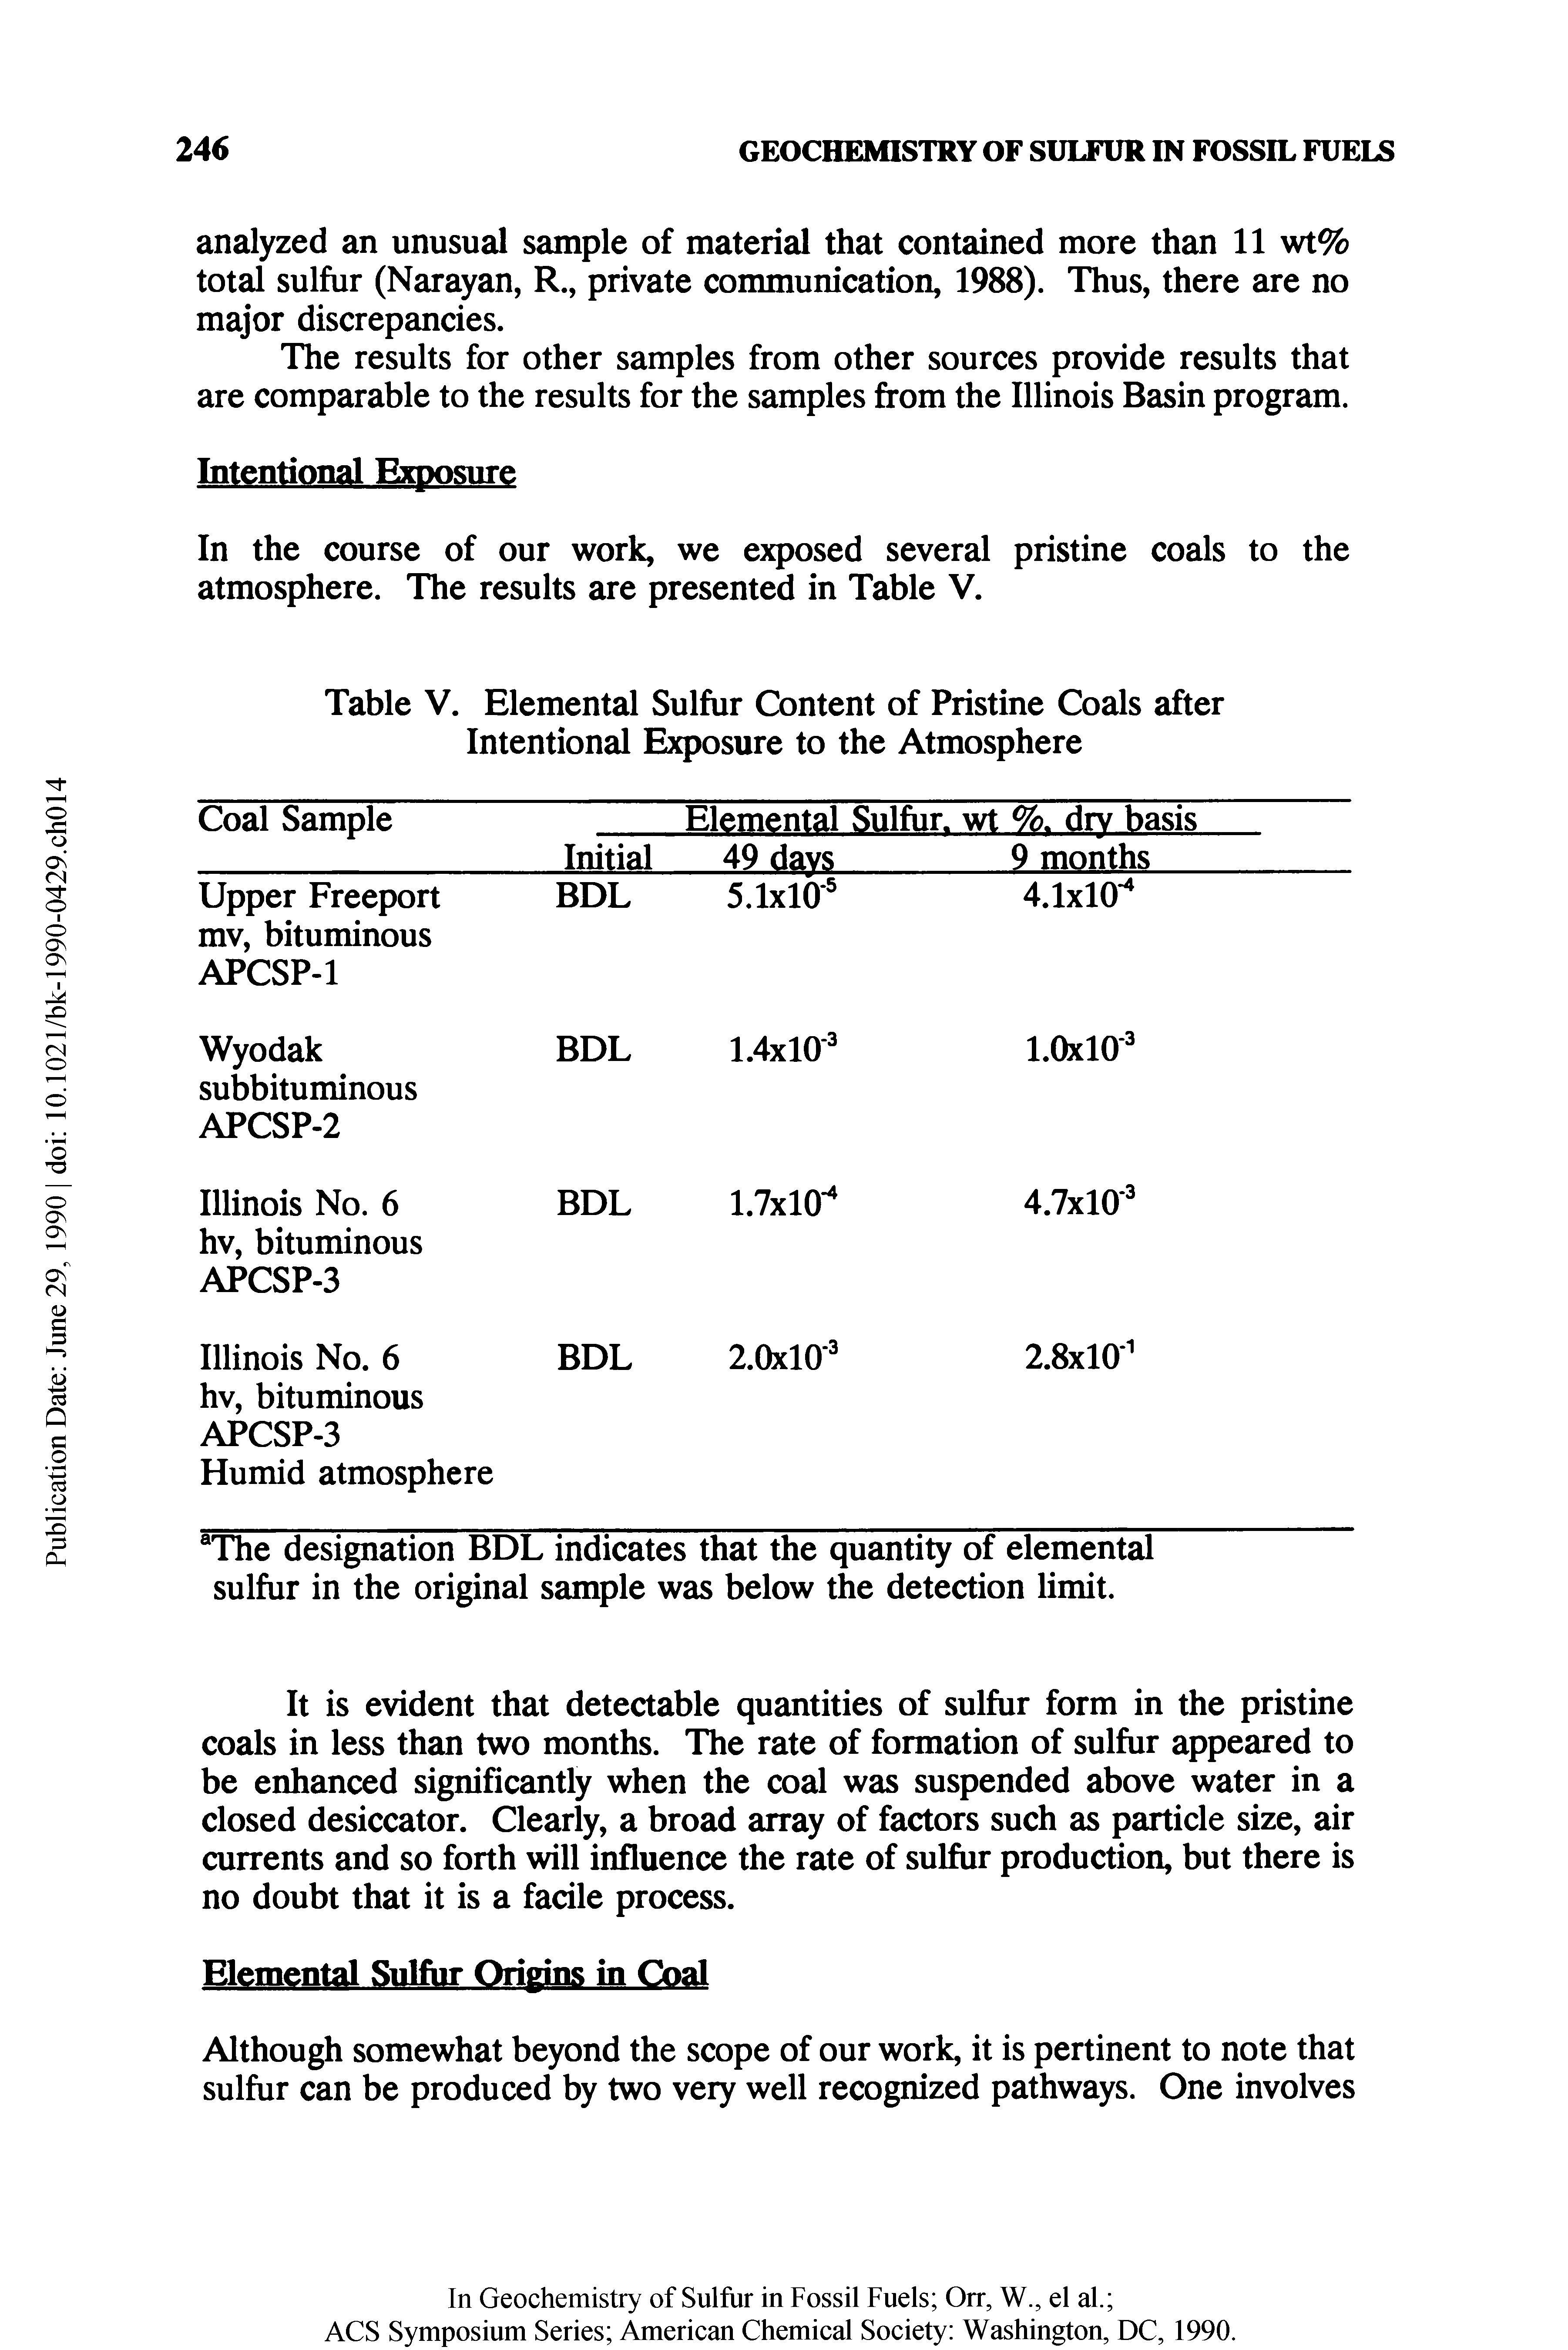 Table V. Elemental Sulfur Content of Pristine Coals after Intentional Exposure to the Atmosphere...